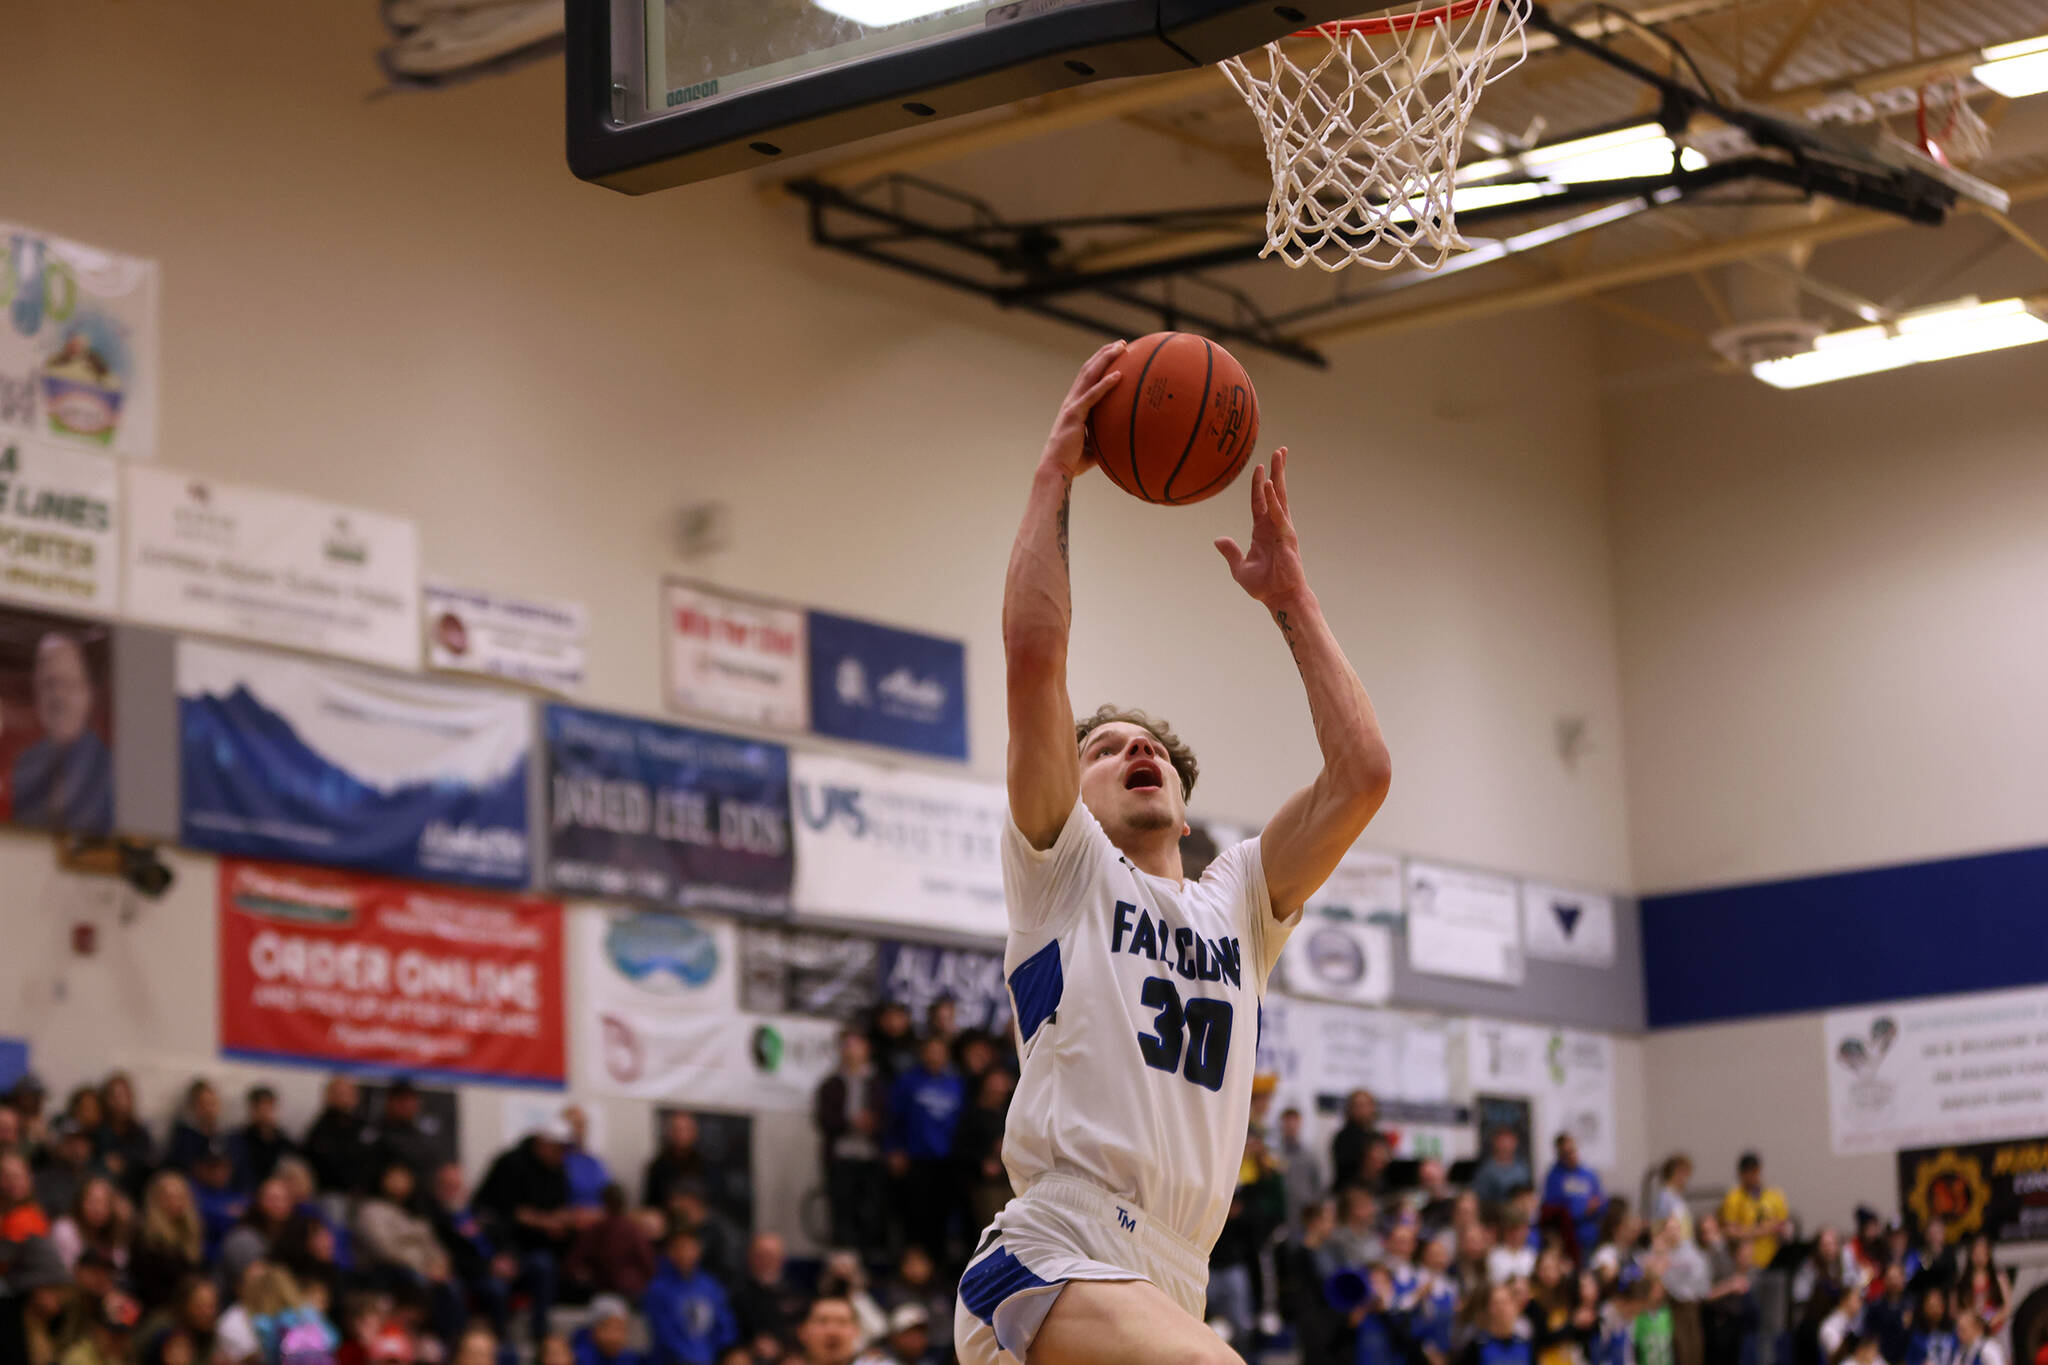 TMHS junior Thomas Baxter rises for a layup on a fastbreak during a Saturday night game against Ketchikan. Baxter on Feb. 9 became the fastest Falcon to reach 1,000 points and is now the school's third leading scorer.  (Ben Hohenstatt / Juneau Empire)